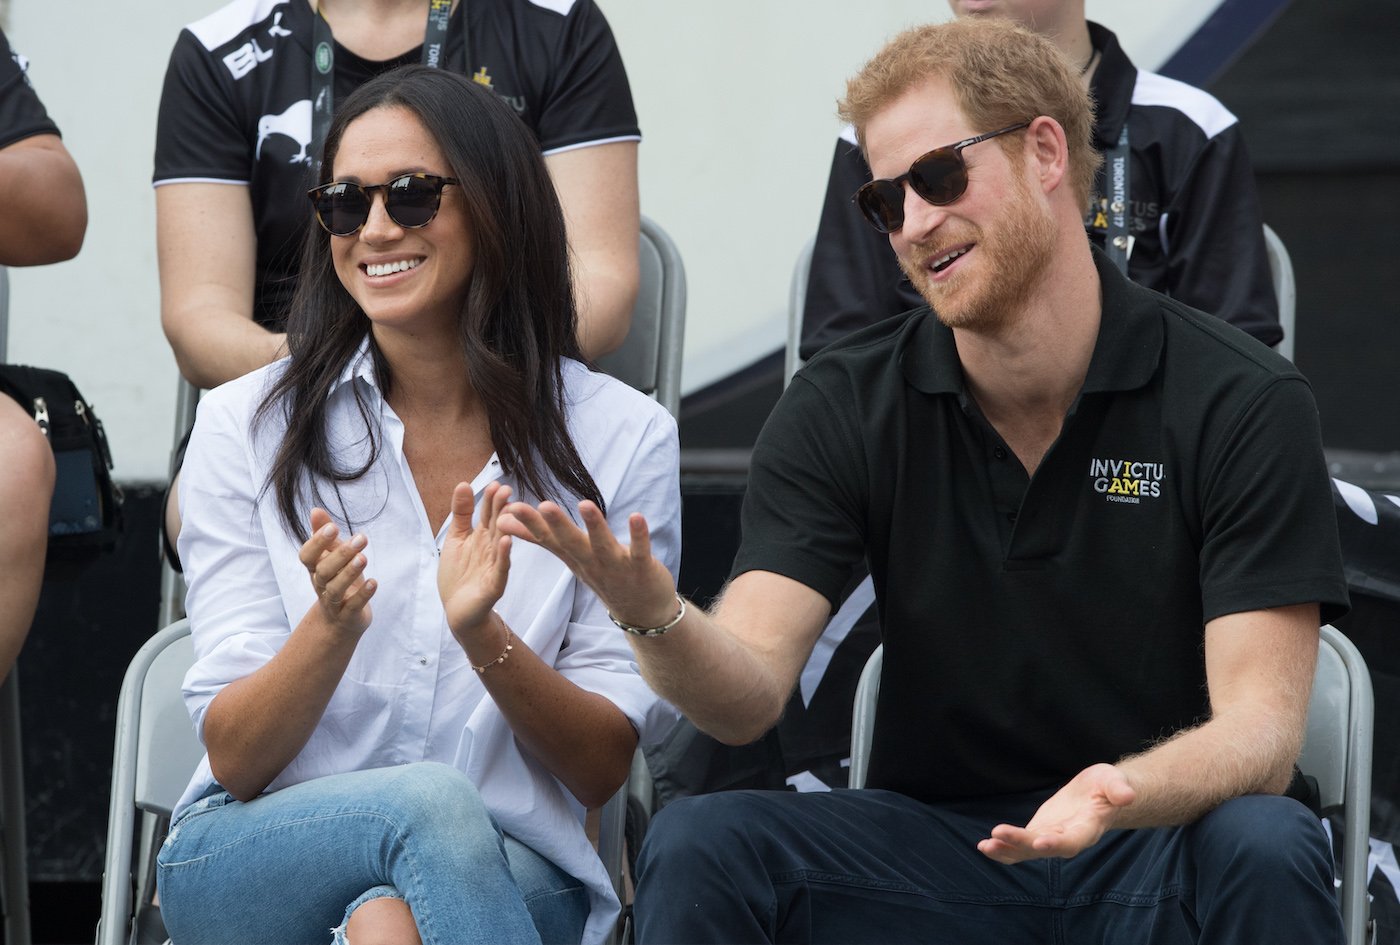 Meghan Markle and Prince Harry sit next to each other at a sporting event